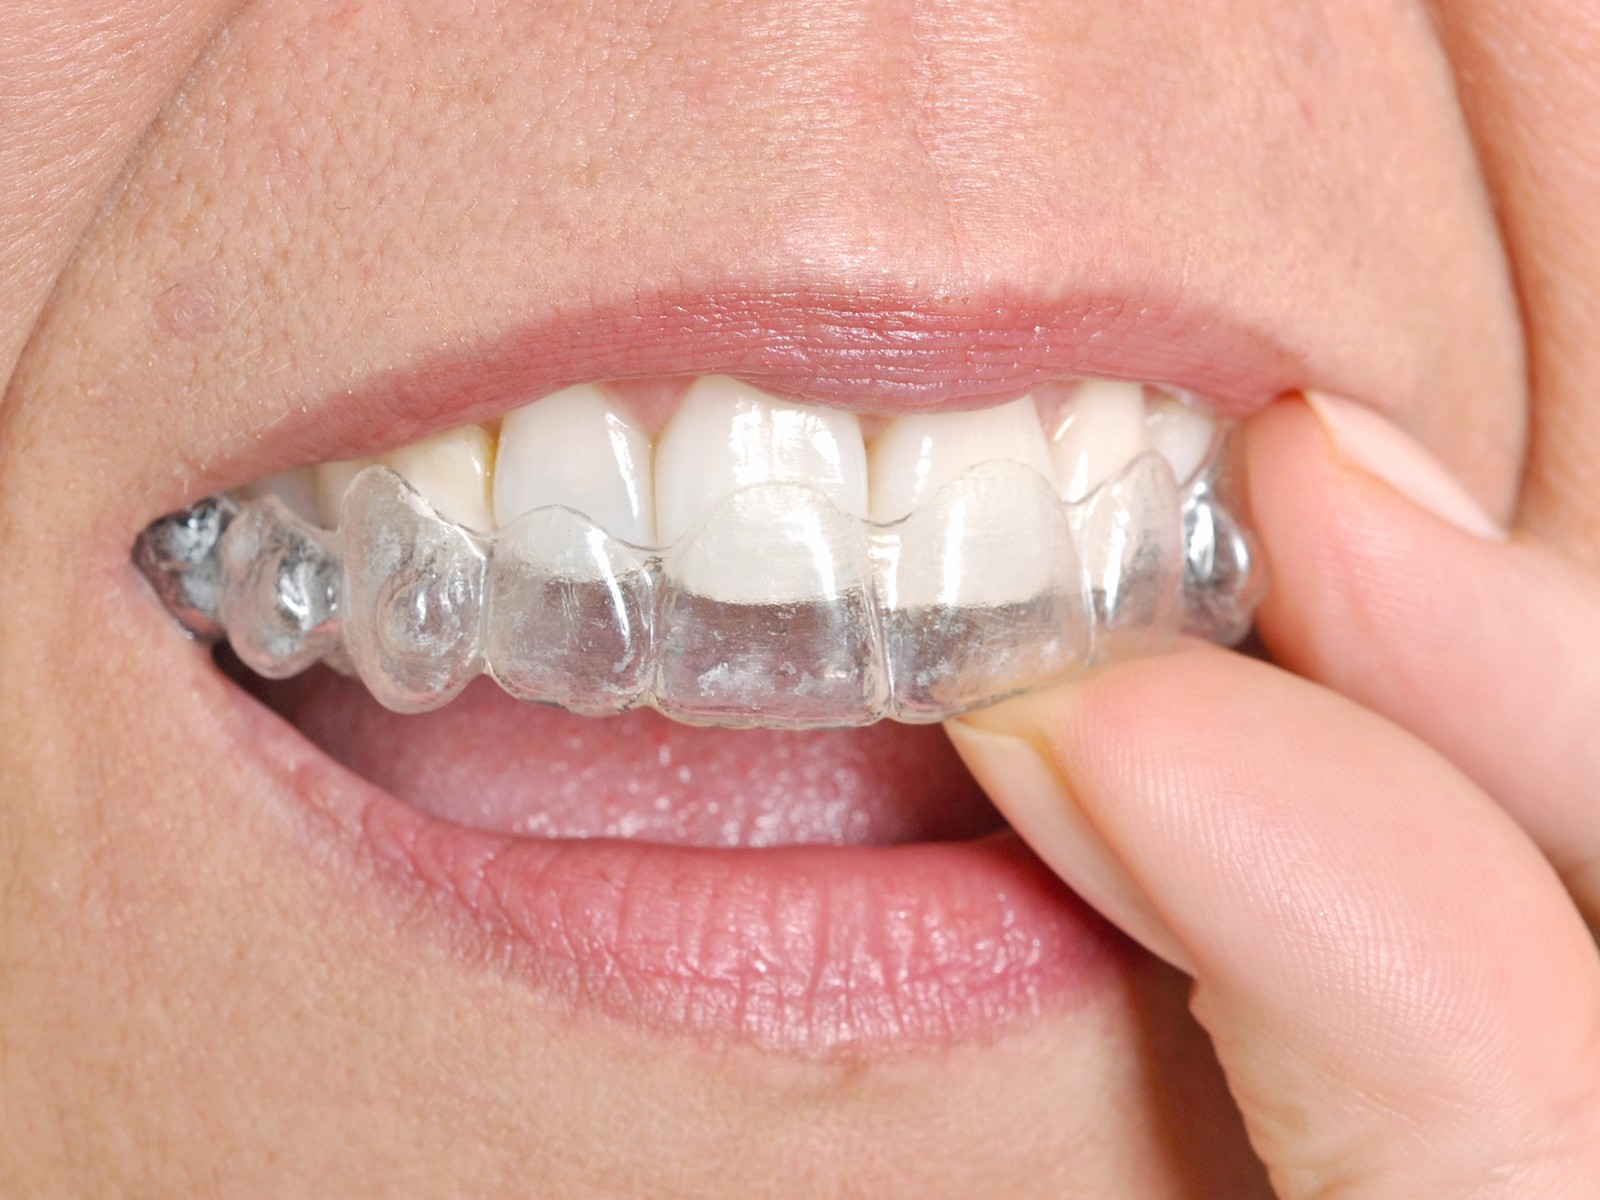 Why is Invisalign so slow?